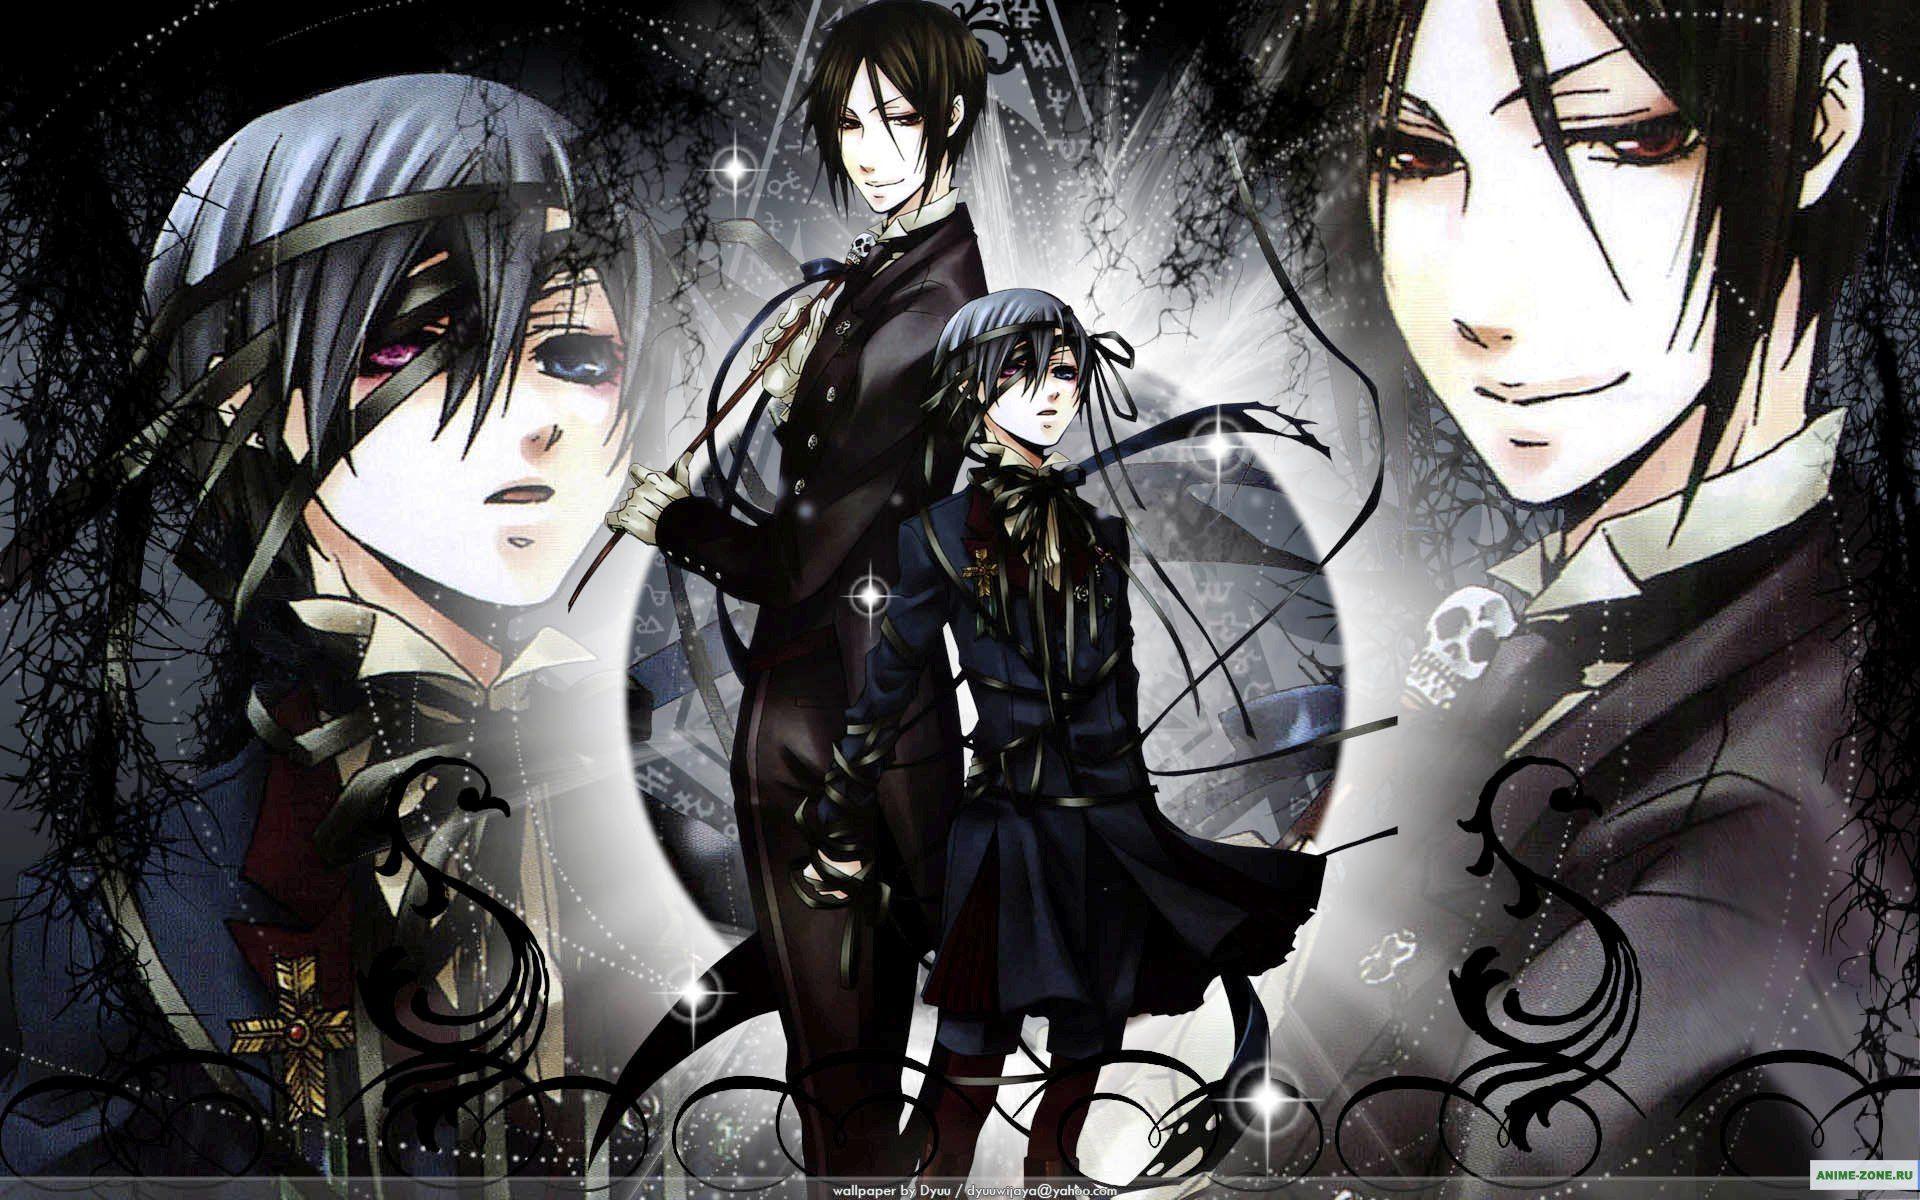 Black Butler Hd Wallpapers Top Free Black Butler Hd Backgrounds Images, Photos, Reviews